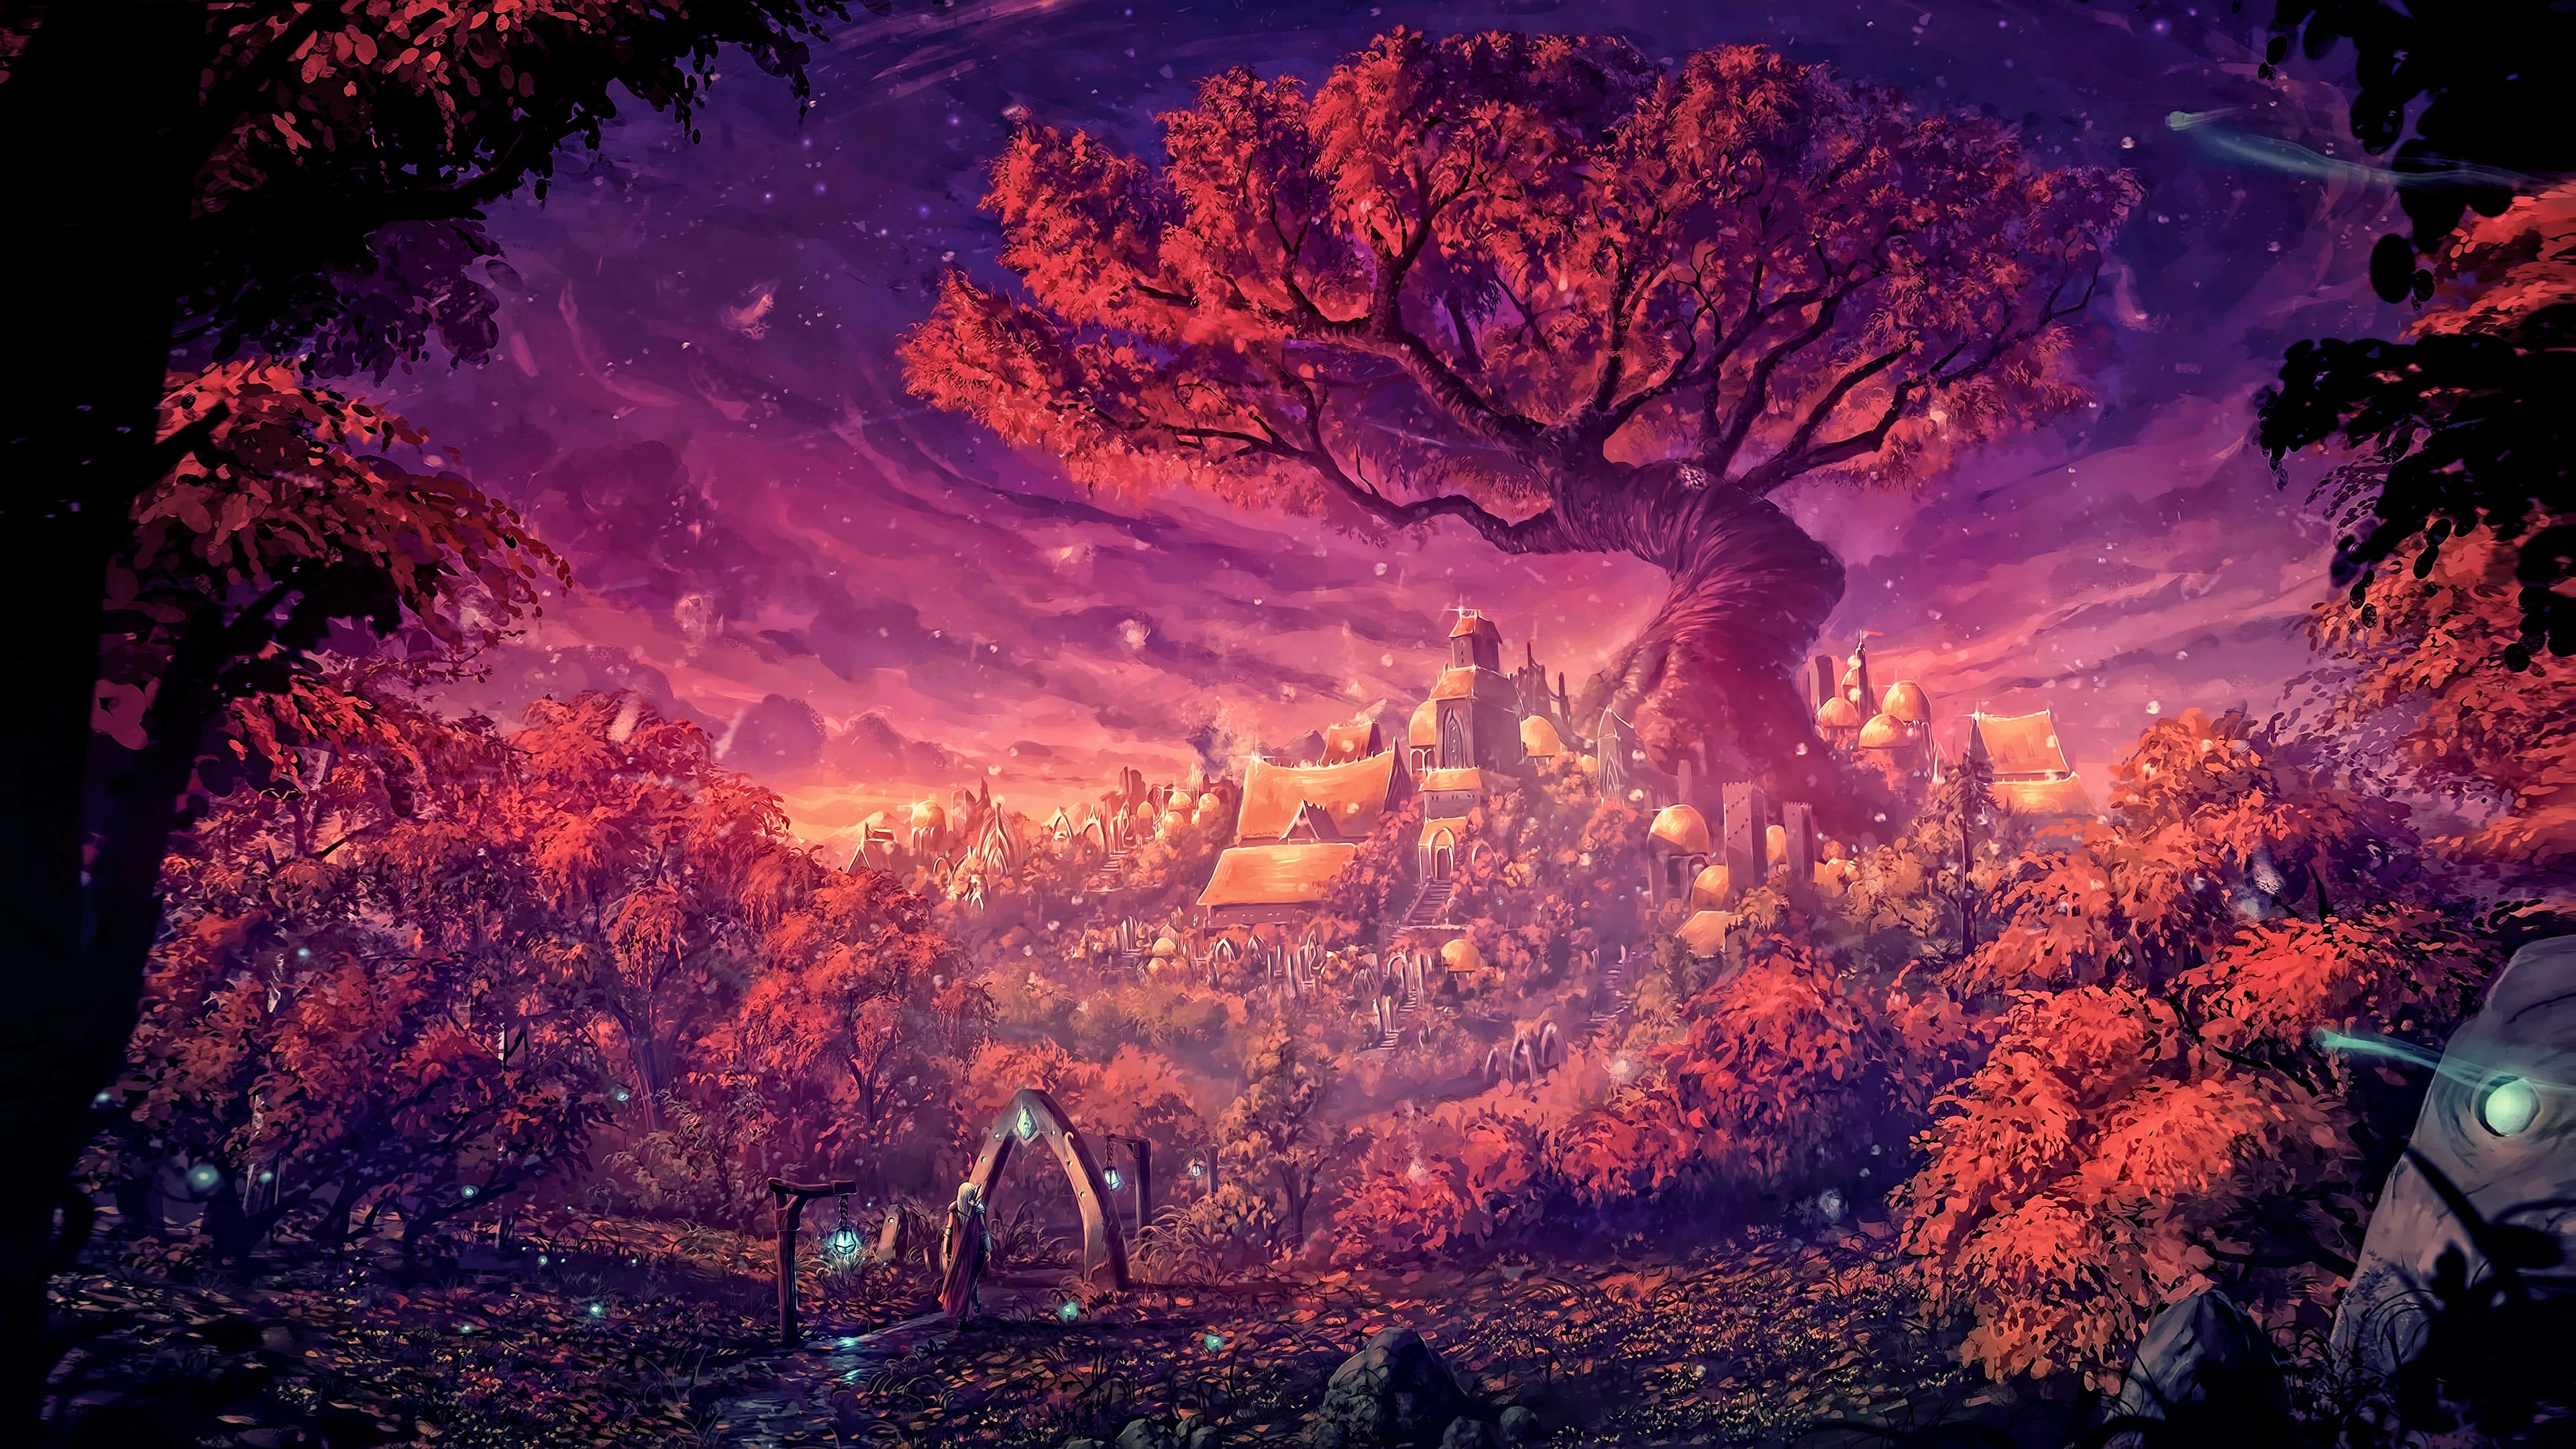 Wallpapers Featuring A Tree Of Life